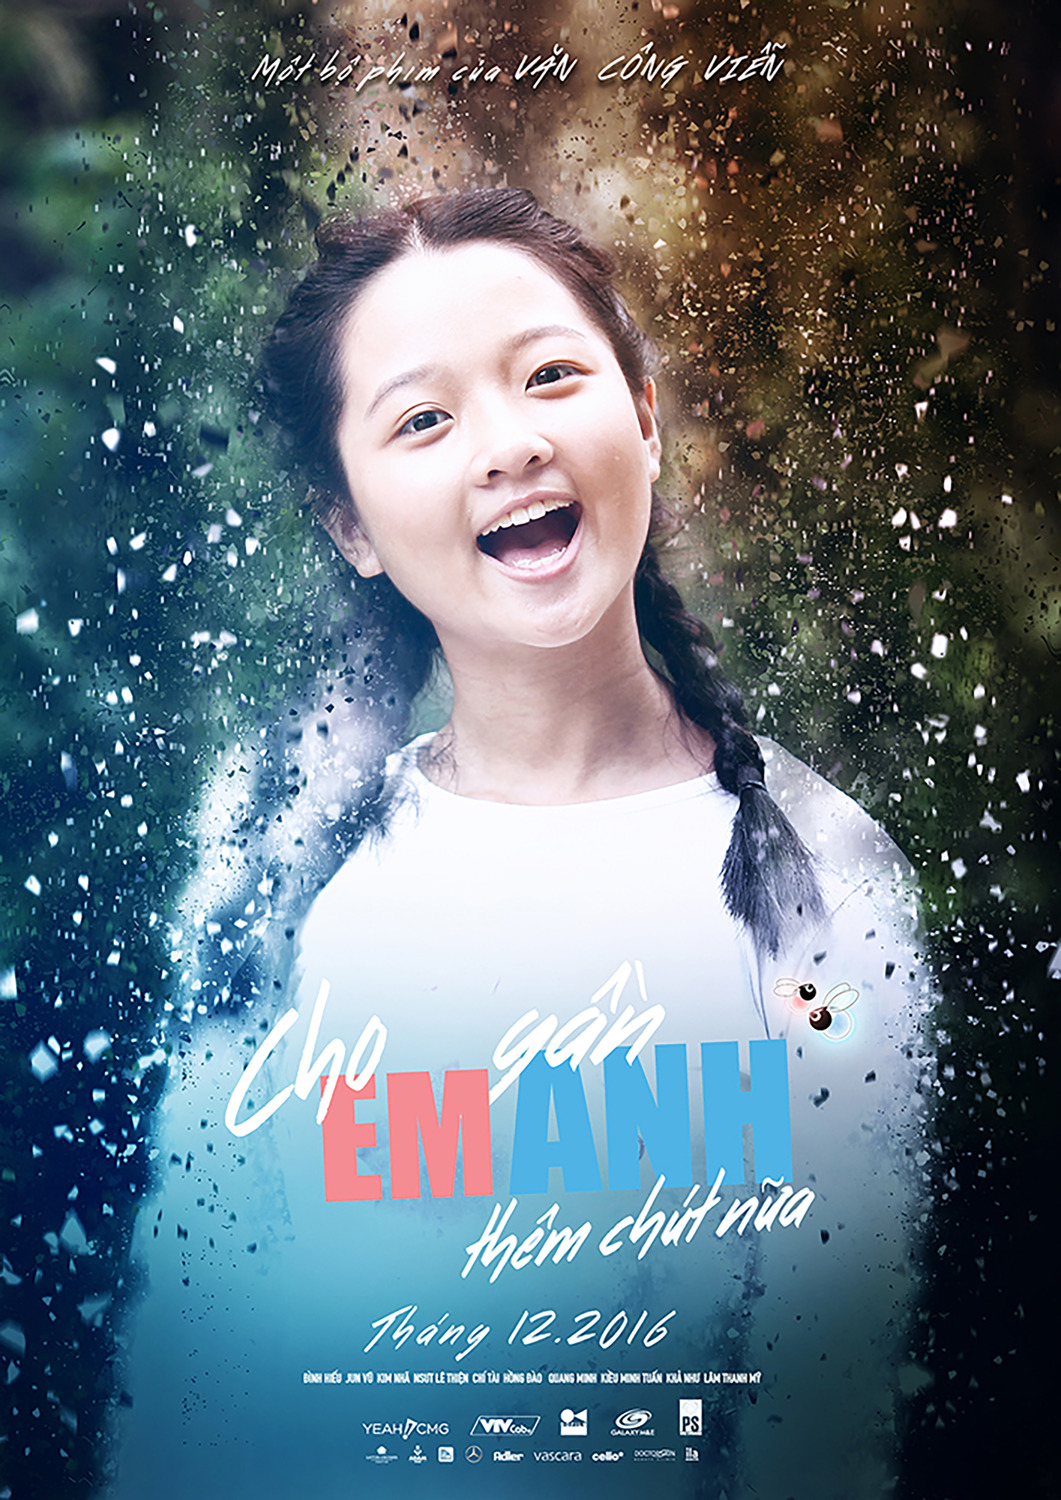 Extra Large Movie Poster Image for Cho em gần anh thêm chút nữa (#14 of 14)